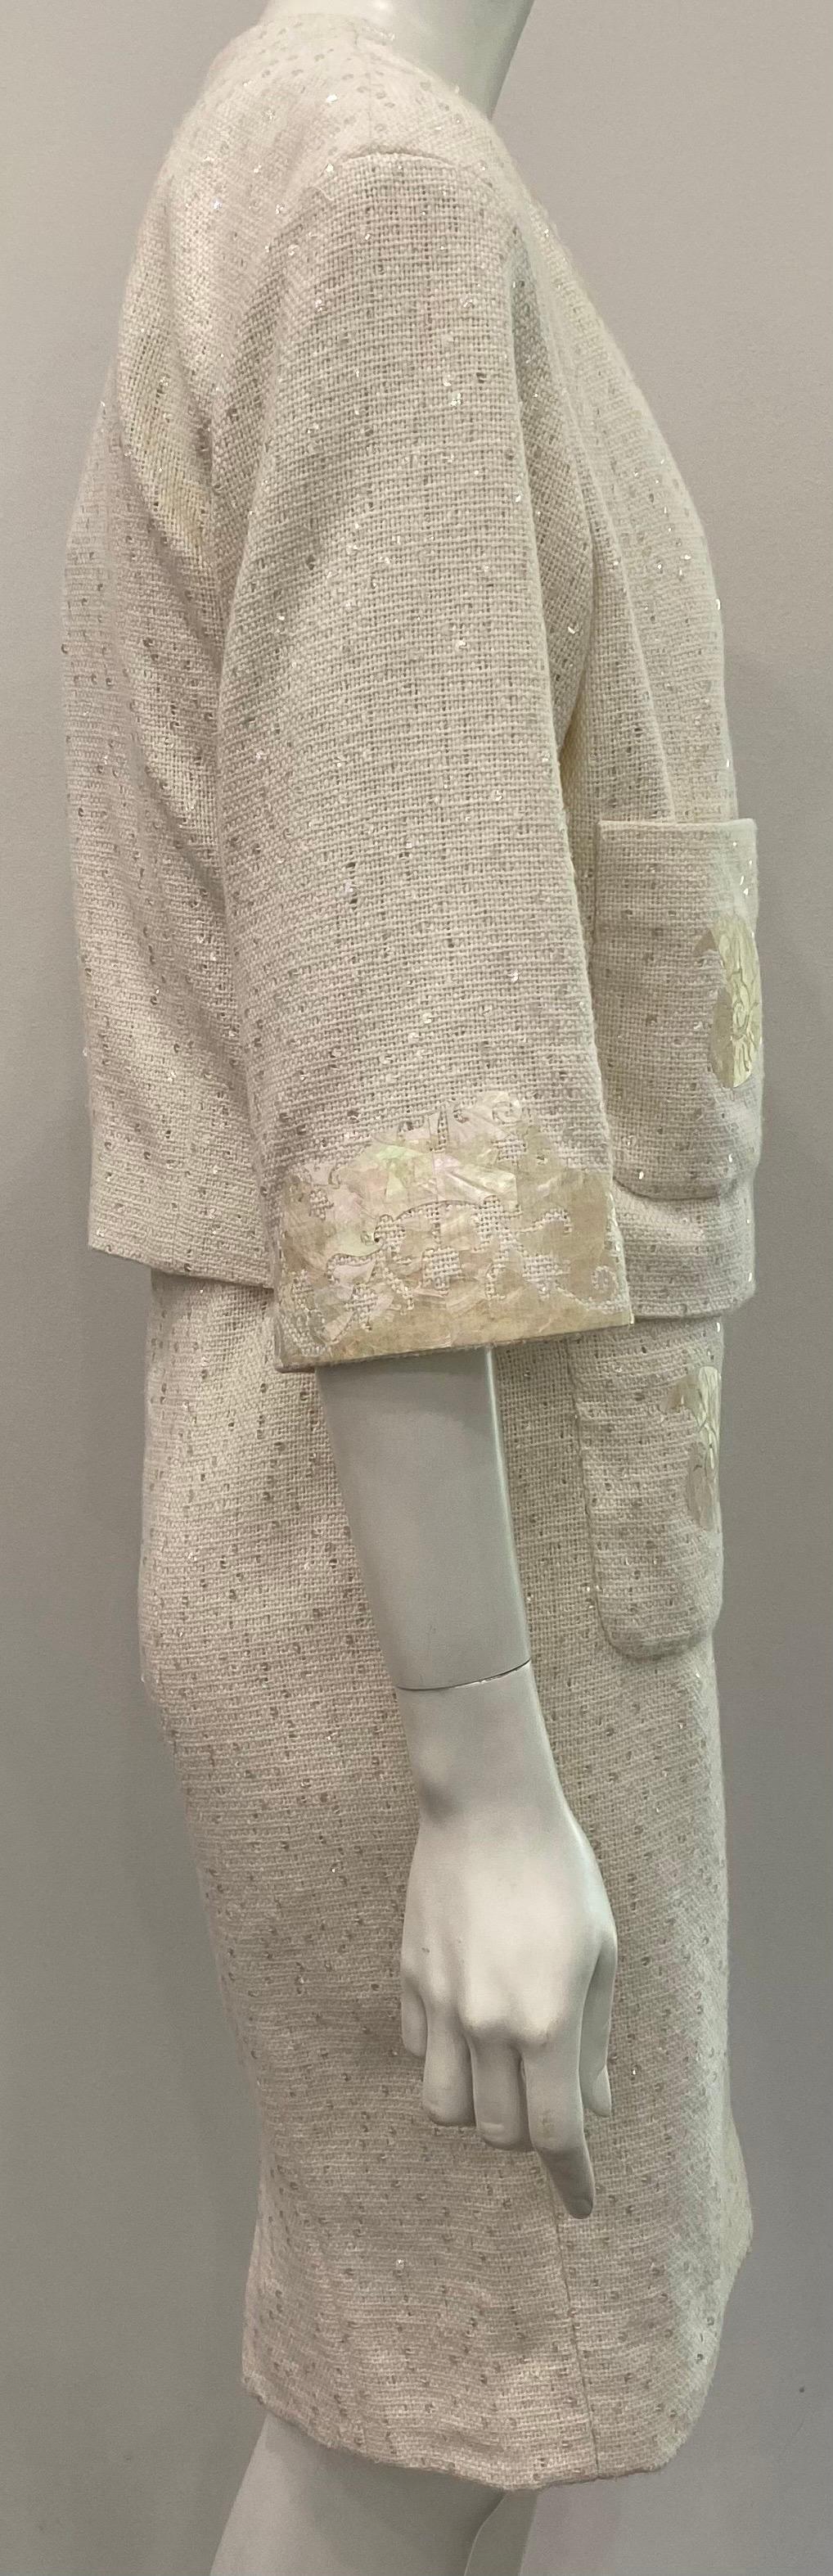 Gray Chanel Runway 2012P Cream Cotton Embellished Strapless Dress with Jacket-Sz 40  For Sale